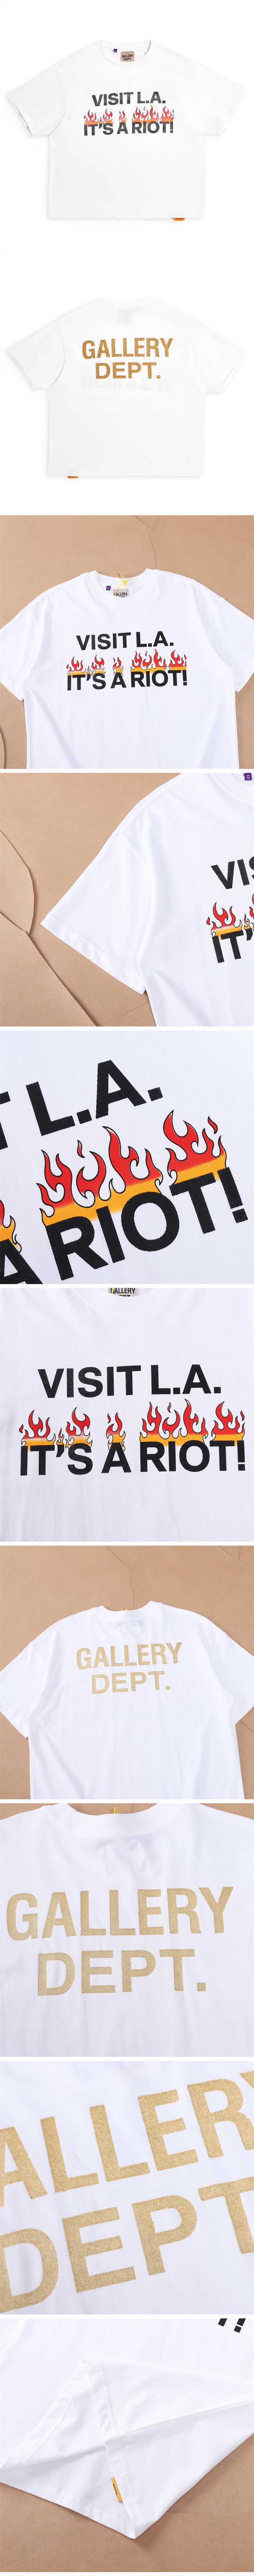 Gallery Dept. Visit L.A It's A Riot! Tee ギャラリーデプト ヴィジット ロサンゼルス Tシャツ